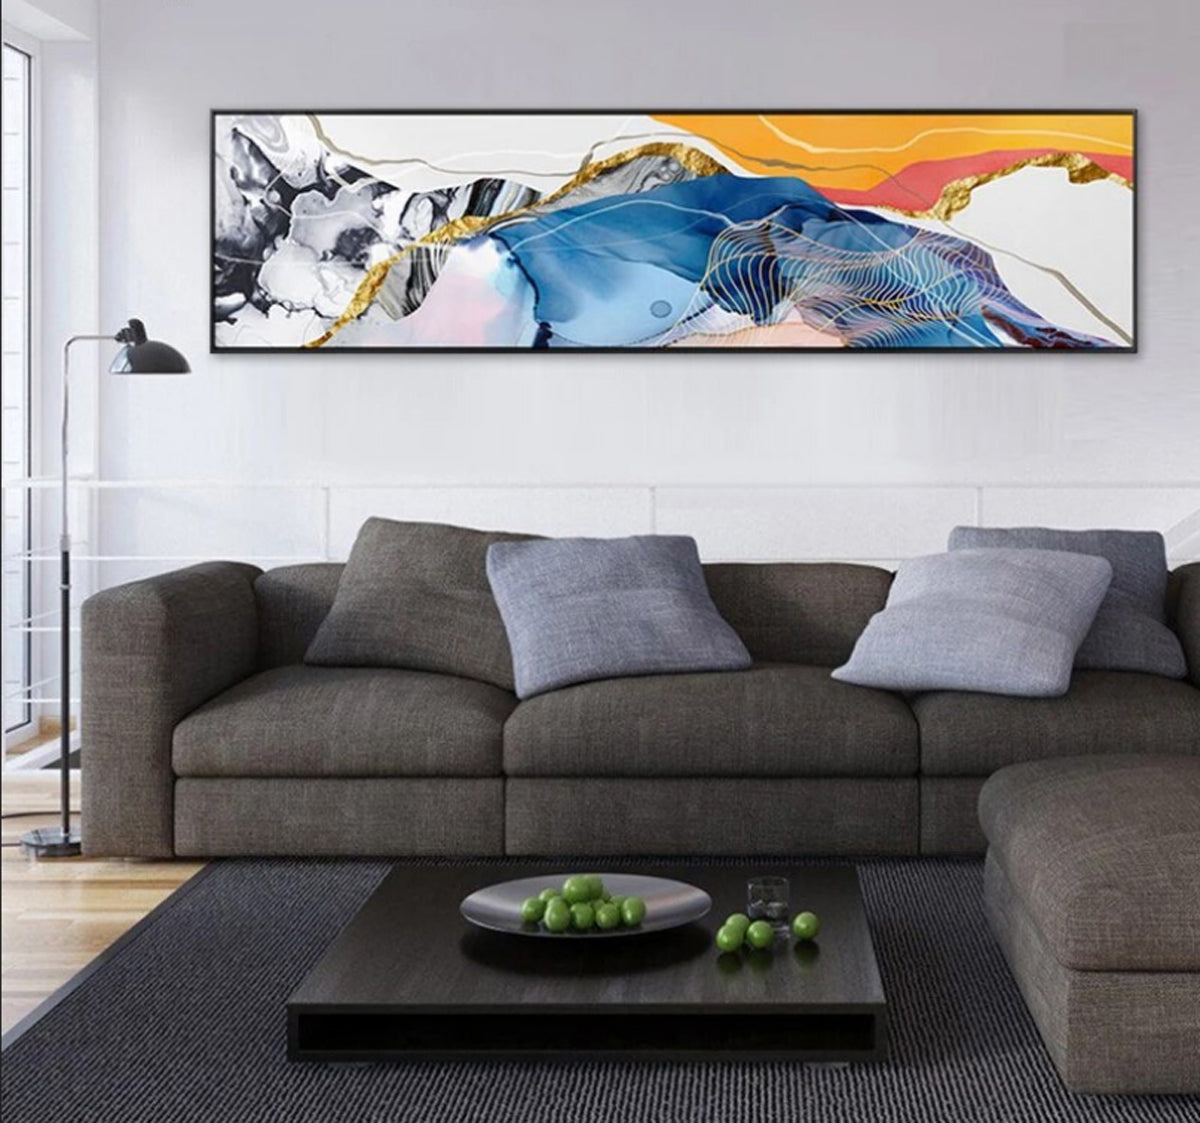 TPFLiving XXL format giant widescreen Traumpreisfabrik canvas luxury poster / abstract –